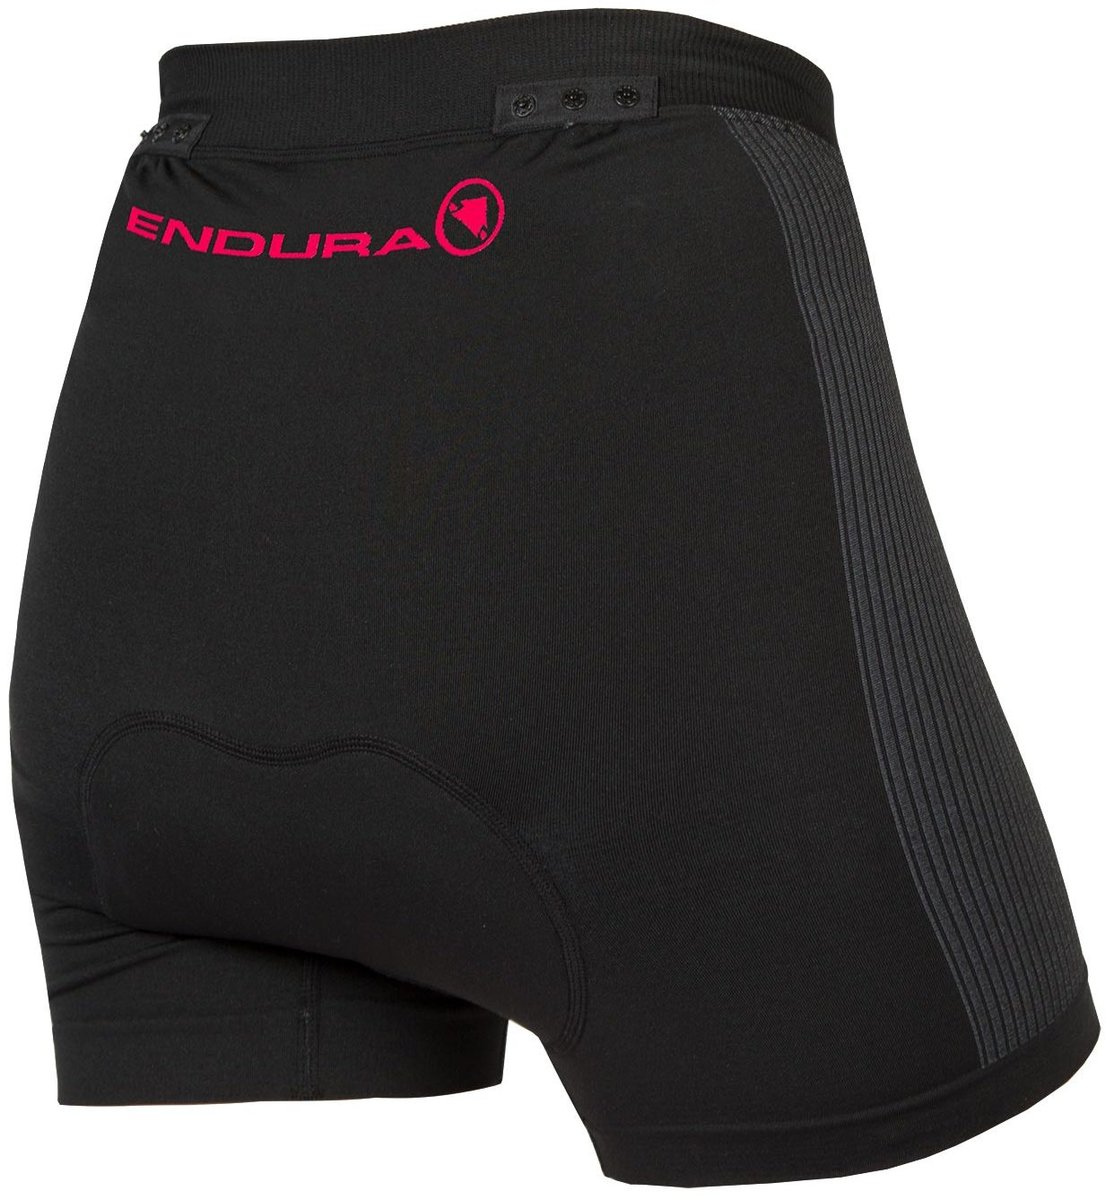 https://www.sefiles.net/images/library/zoom/endura-womens-engineered-padded-boxer-with-clickfast-356153-1-11-1.jpg